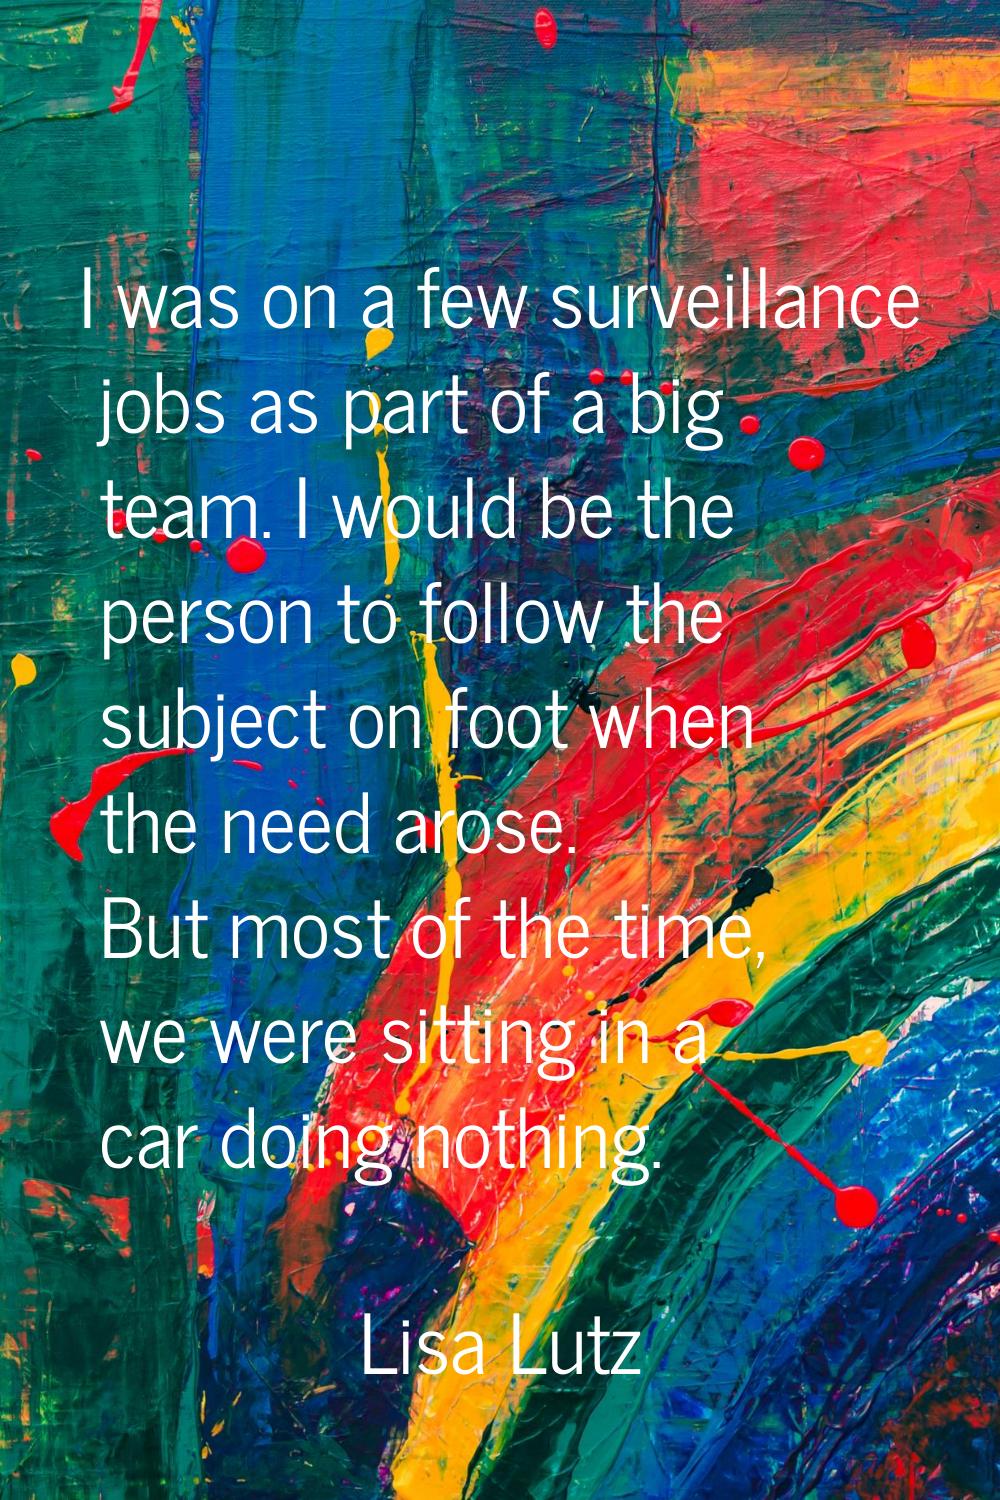 I was on a few surveillance jobs as part of a big team. I would be the person to follow the subject